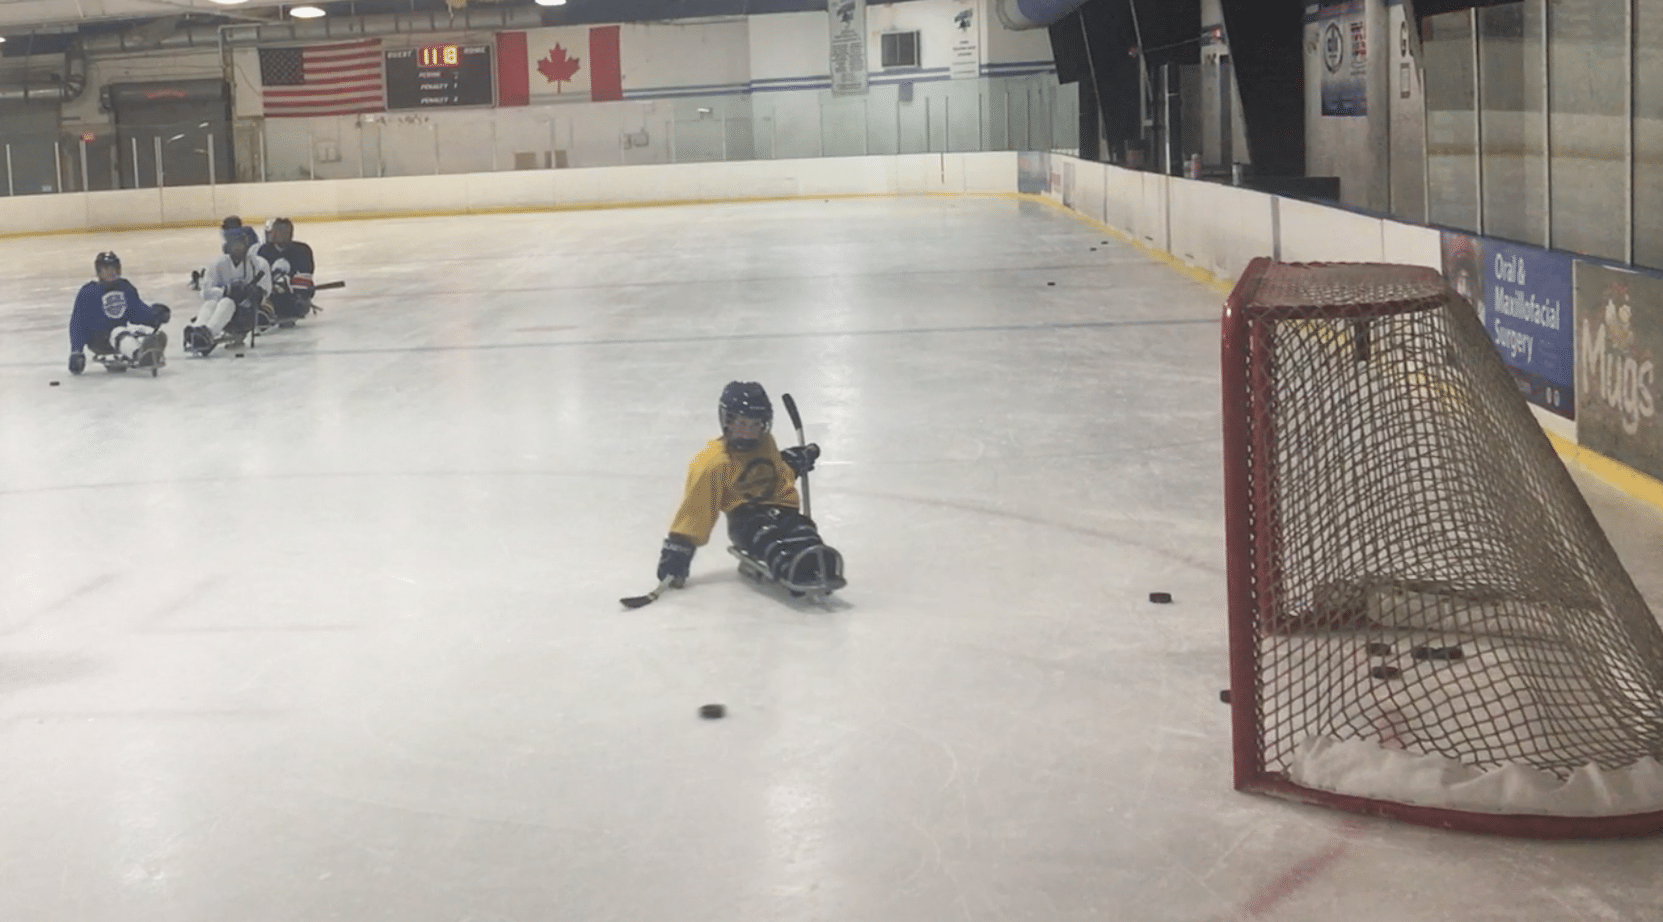 Charlie at the ice rink wearing a yellow jersey and sitting in a hockey sled. He is about to strike a puck toward the goal.